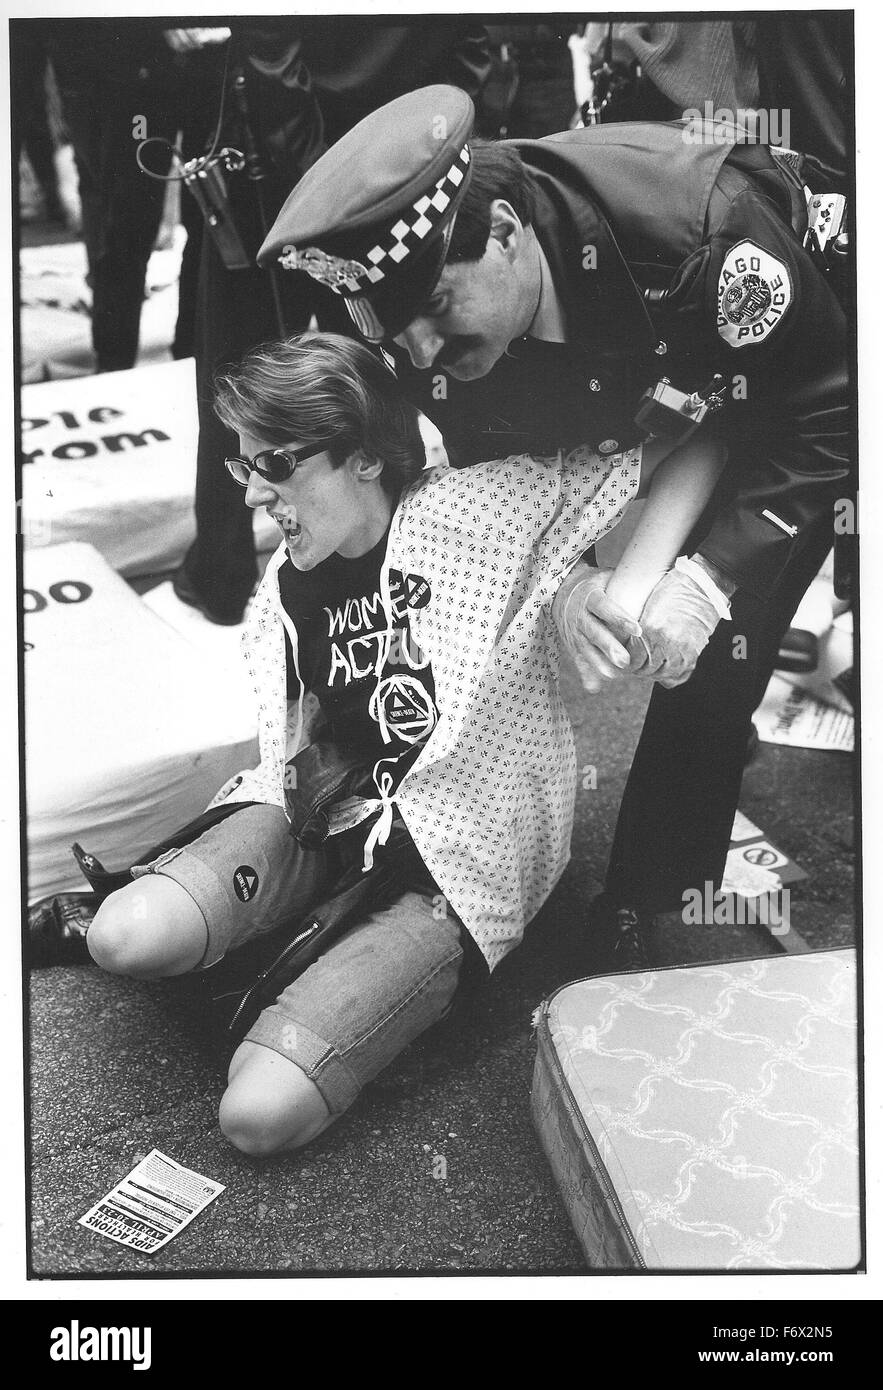 Chicago police arrest a female protester in the ACT UP (AIDS Coalition to Unleash Power) group in April 1990. The group was protesting at a number of sites around the city due to lack of funding for AIDS treatment. In this part of the protest, women created an 'AIDS Ward' in the street, using mattresses and sat down blocking traffic until they were arrested. The specific action targeted the problem that at the time, the Cook County Hospital would not accept female patients in their AIDS ward, despite having empty beds available. Stock Photo